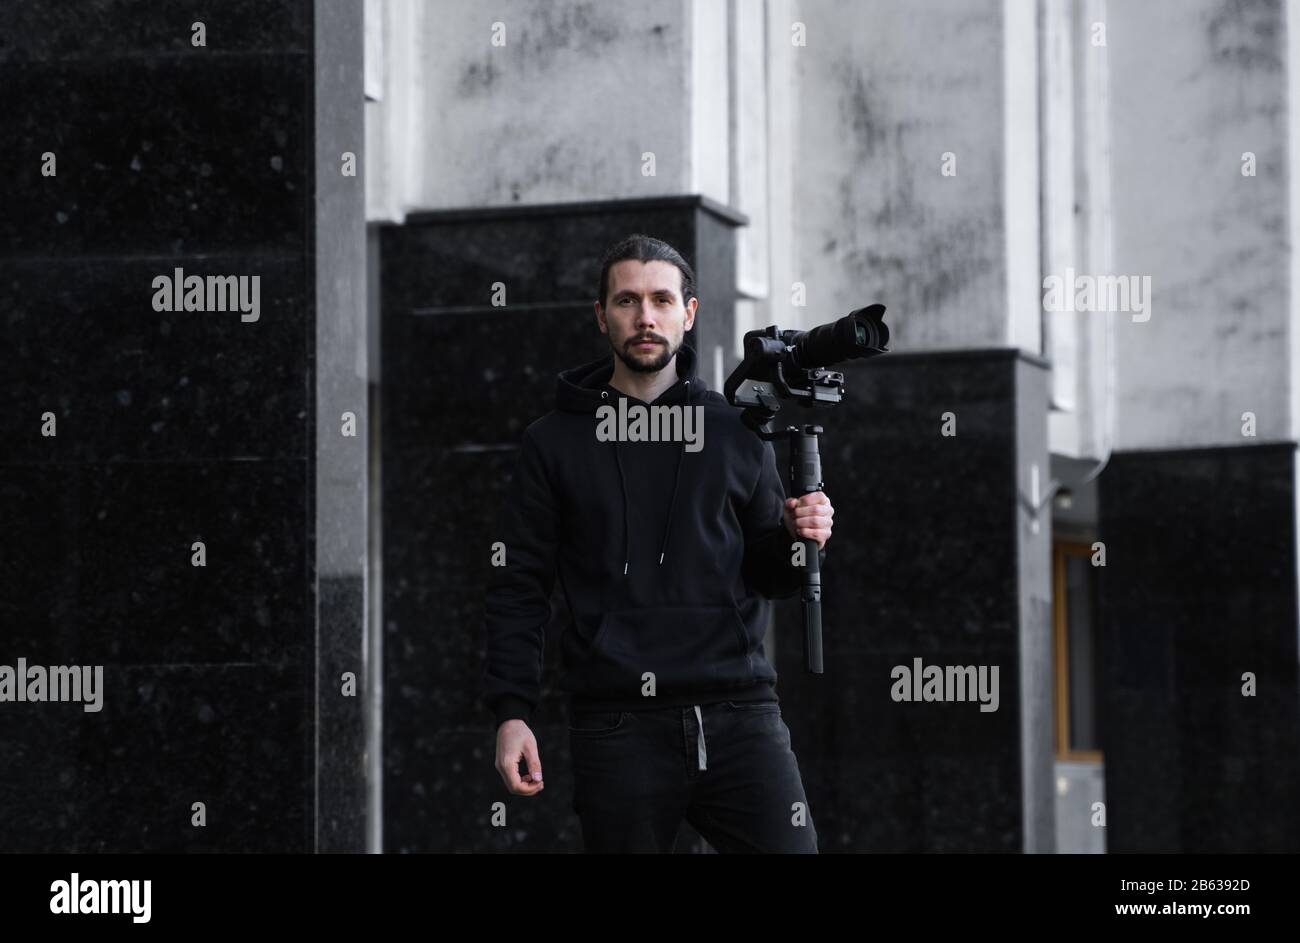 Young Professional videographer holding professional camera on 3-axis gimbal stabilizer. Pro equipment helps to make high quality video without Stock Photo